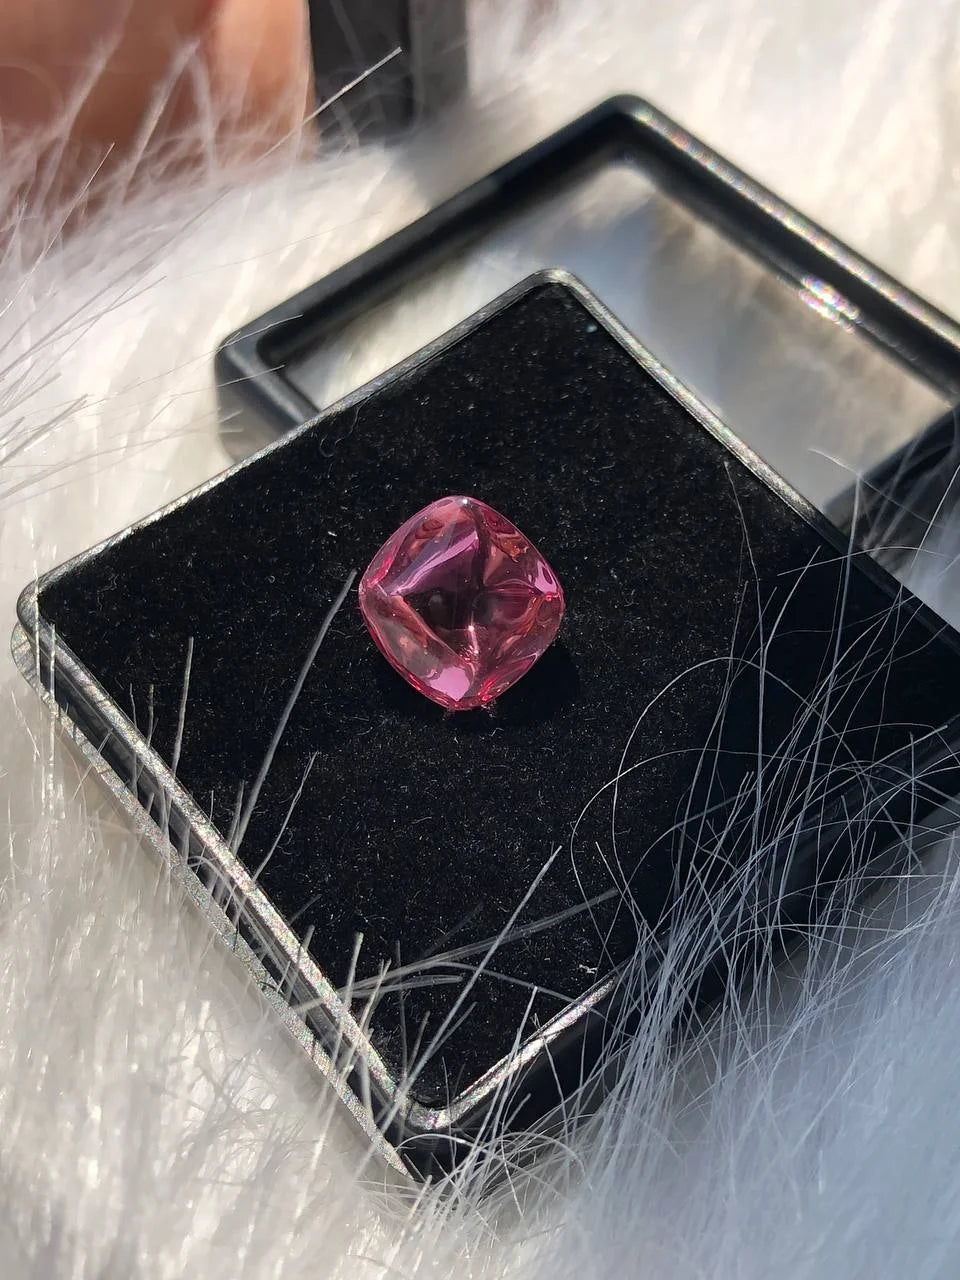 5.03 CT Unfaceted Cushion Shape Loose Gemstone Pink Sapphire Gemstone For Ring